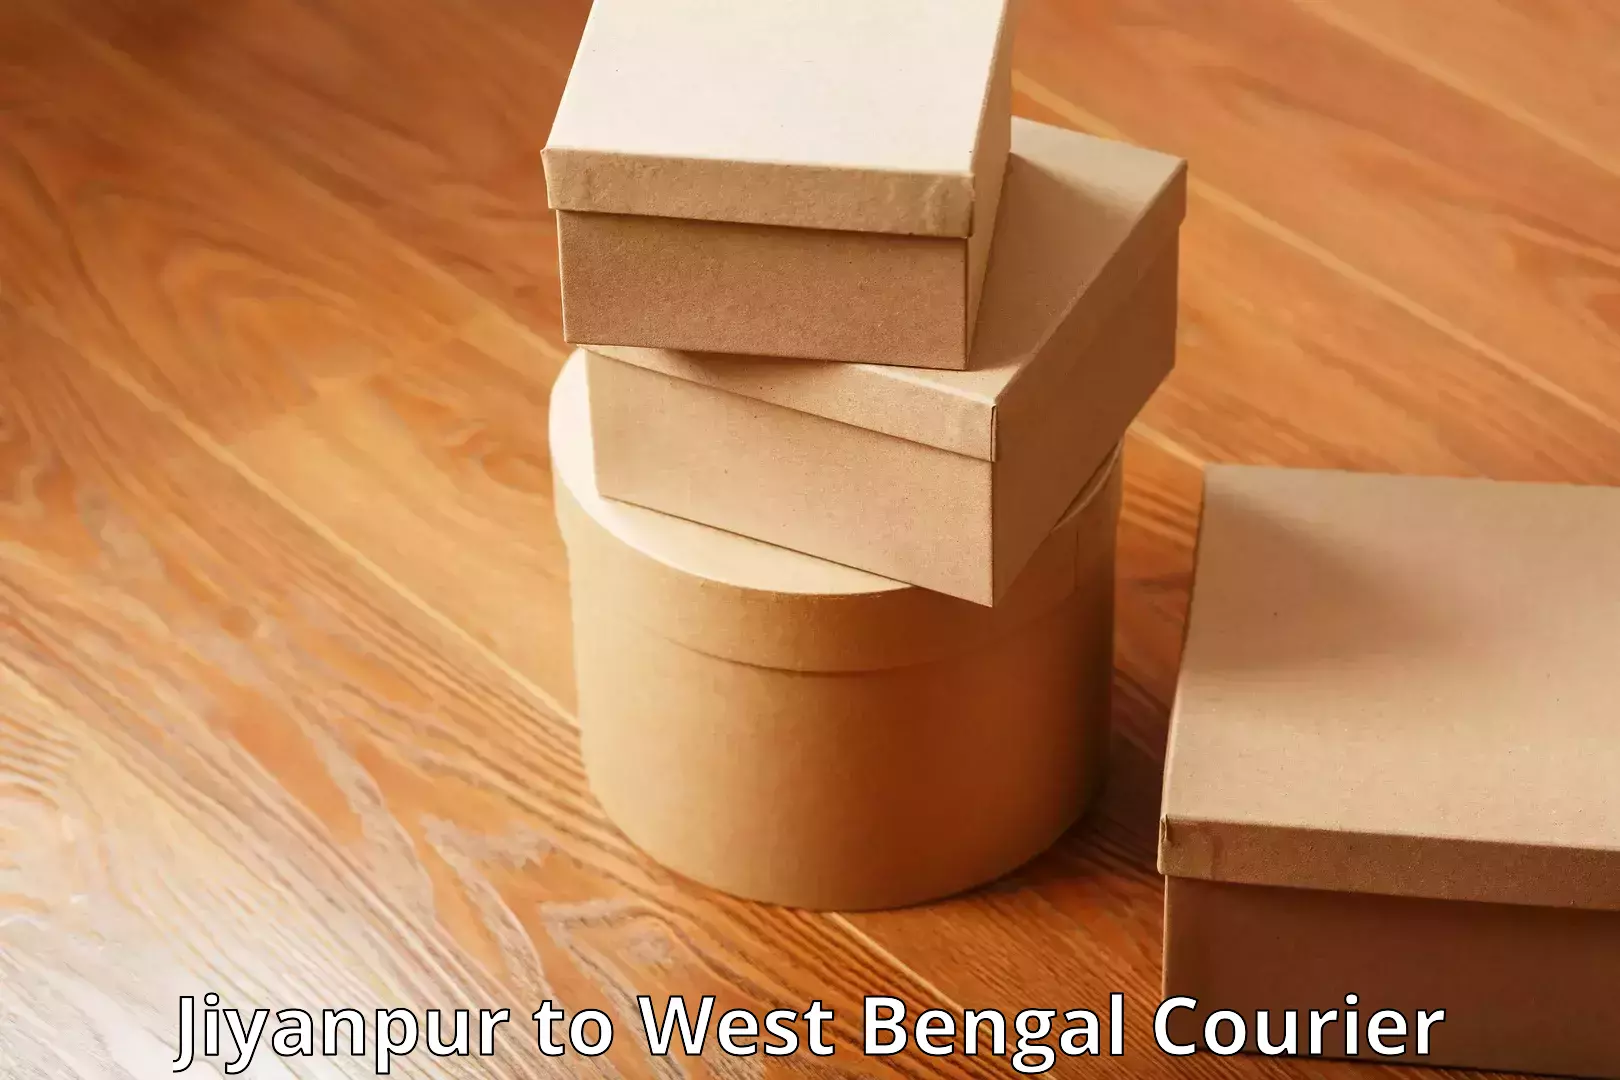 Luggage shipment specialists Jiyanpur to West Bengal